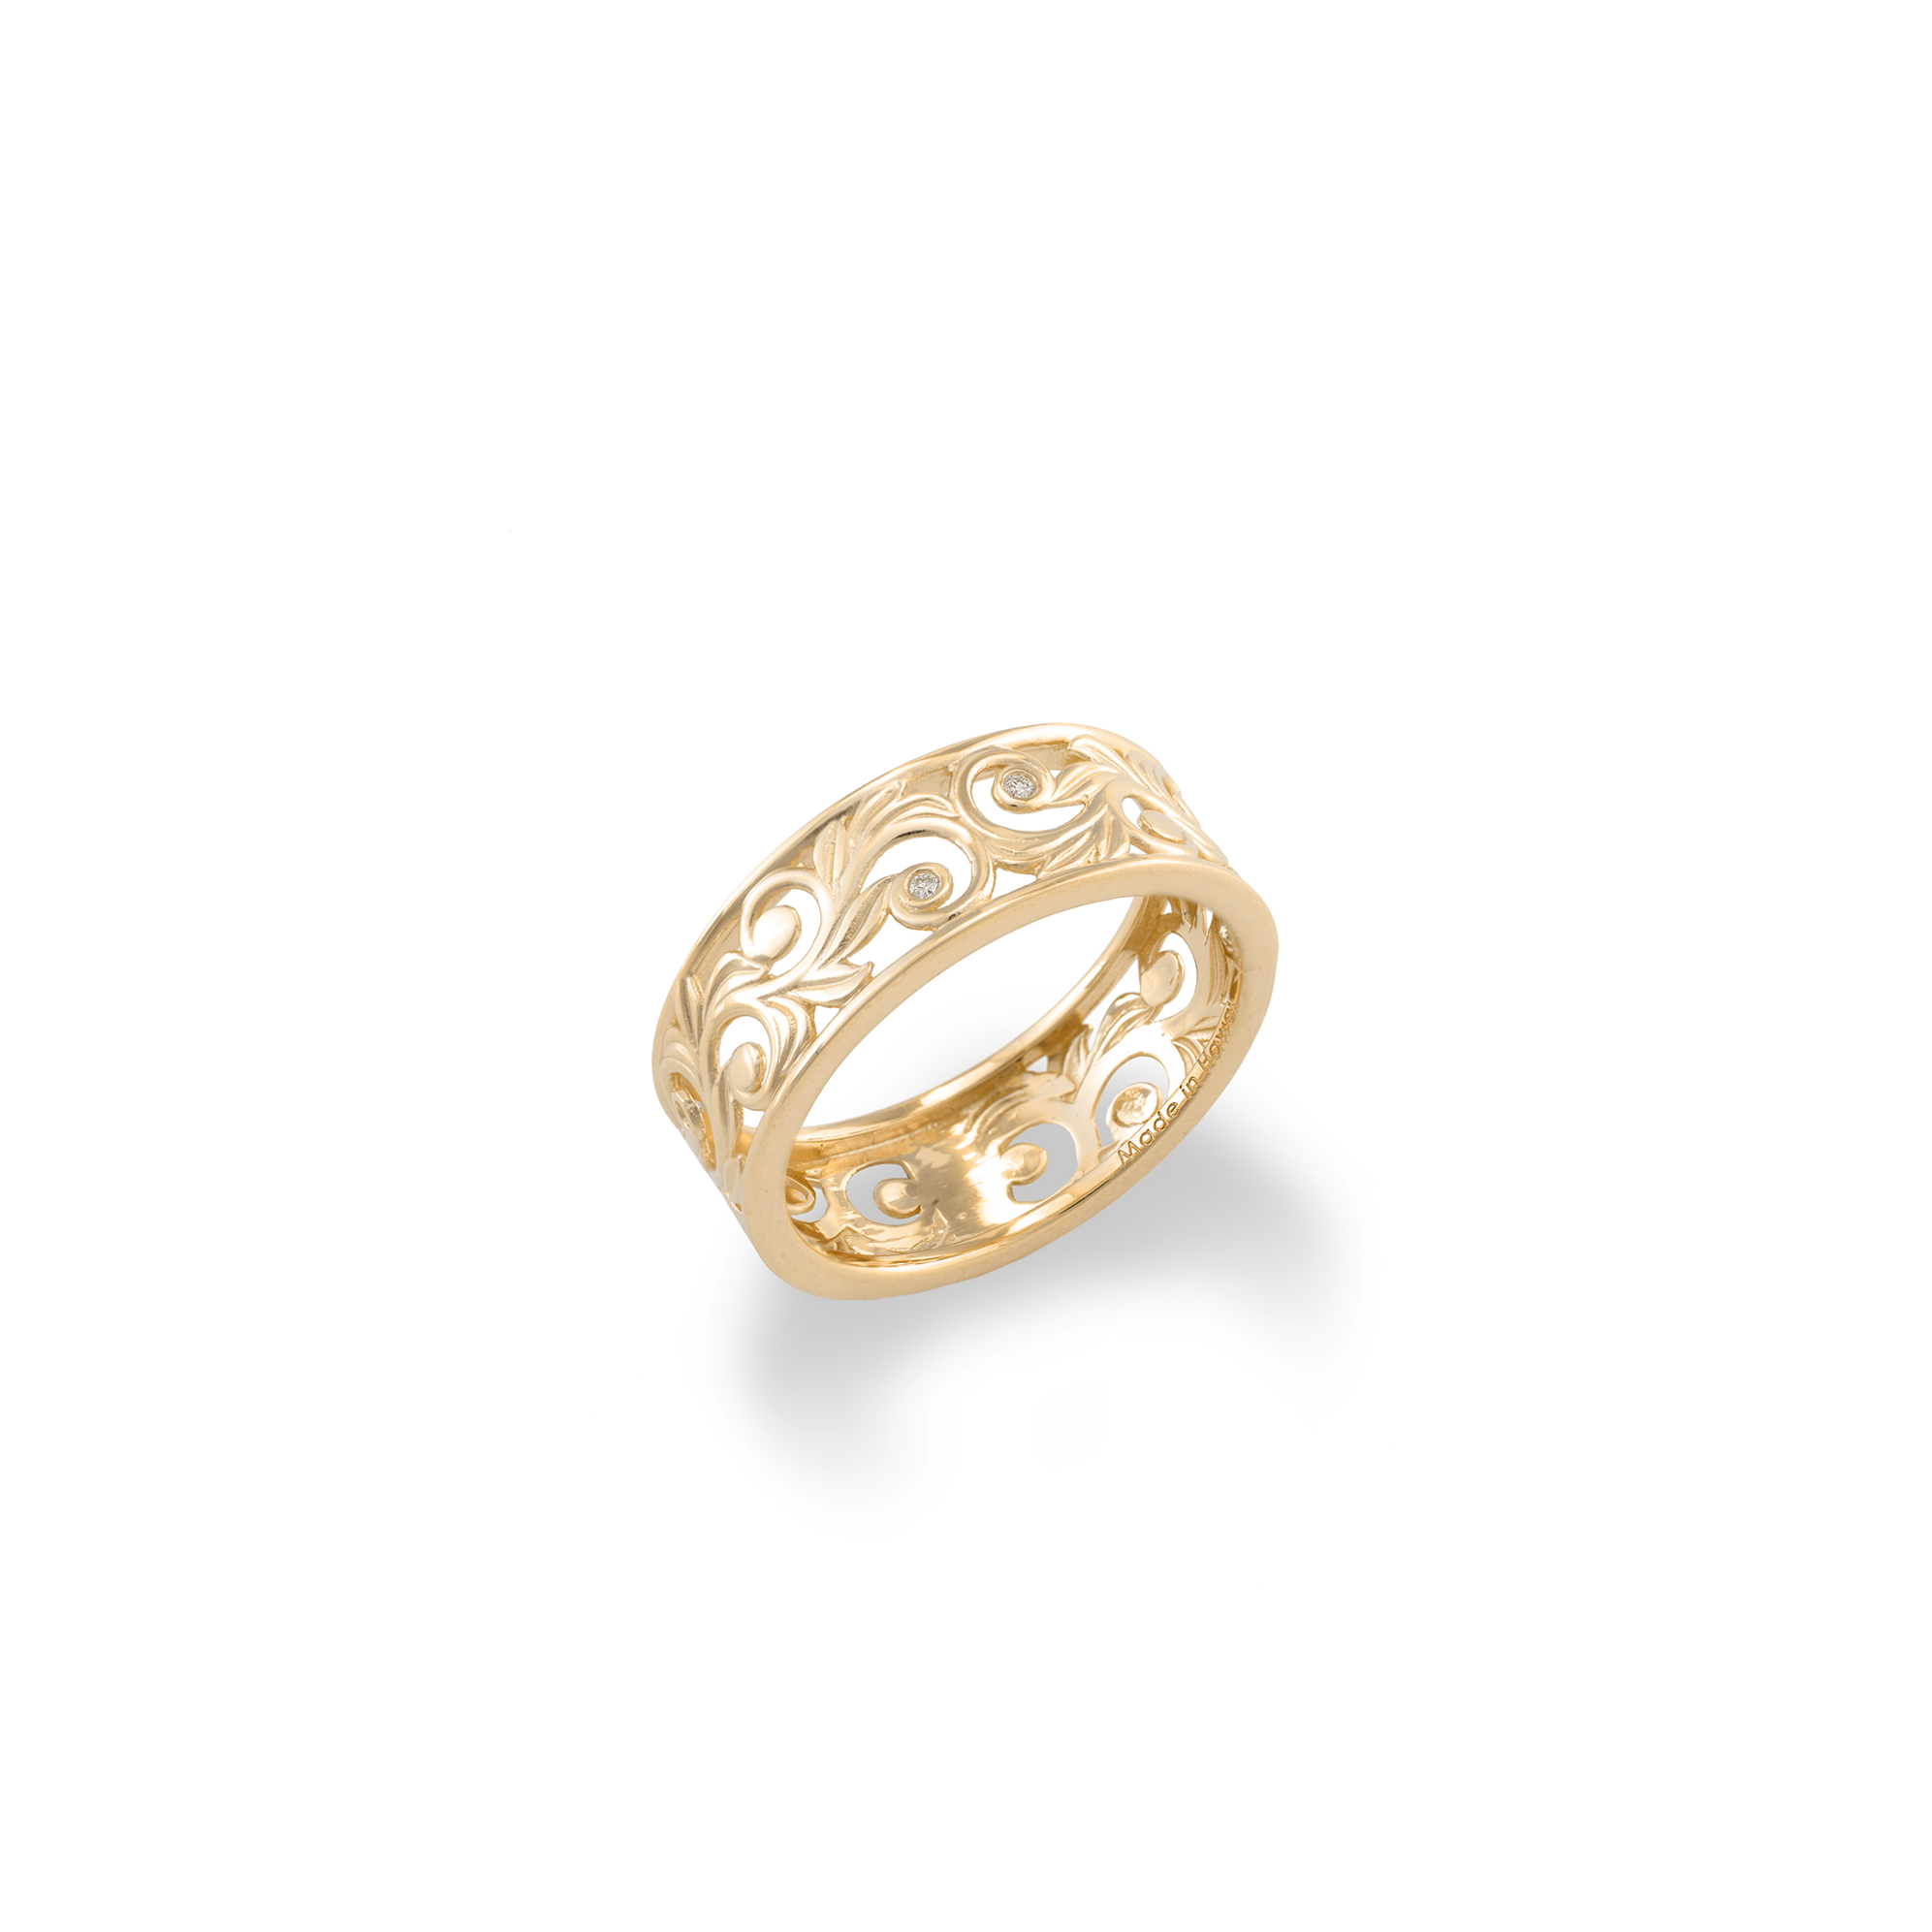 Living Heirloom Ring in Gold with Diamonds - 8mm